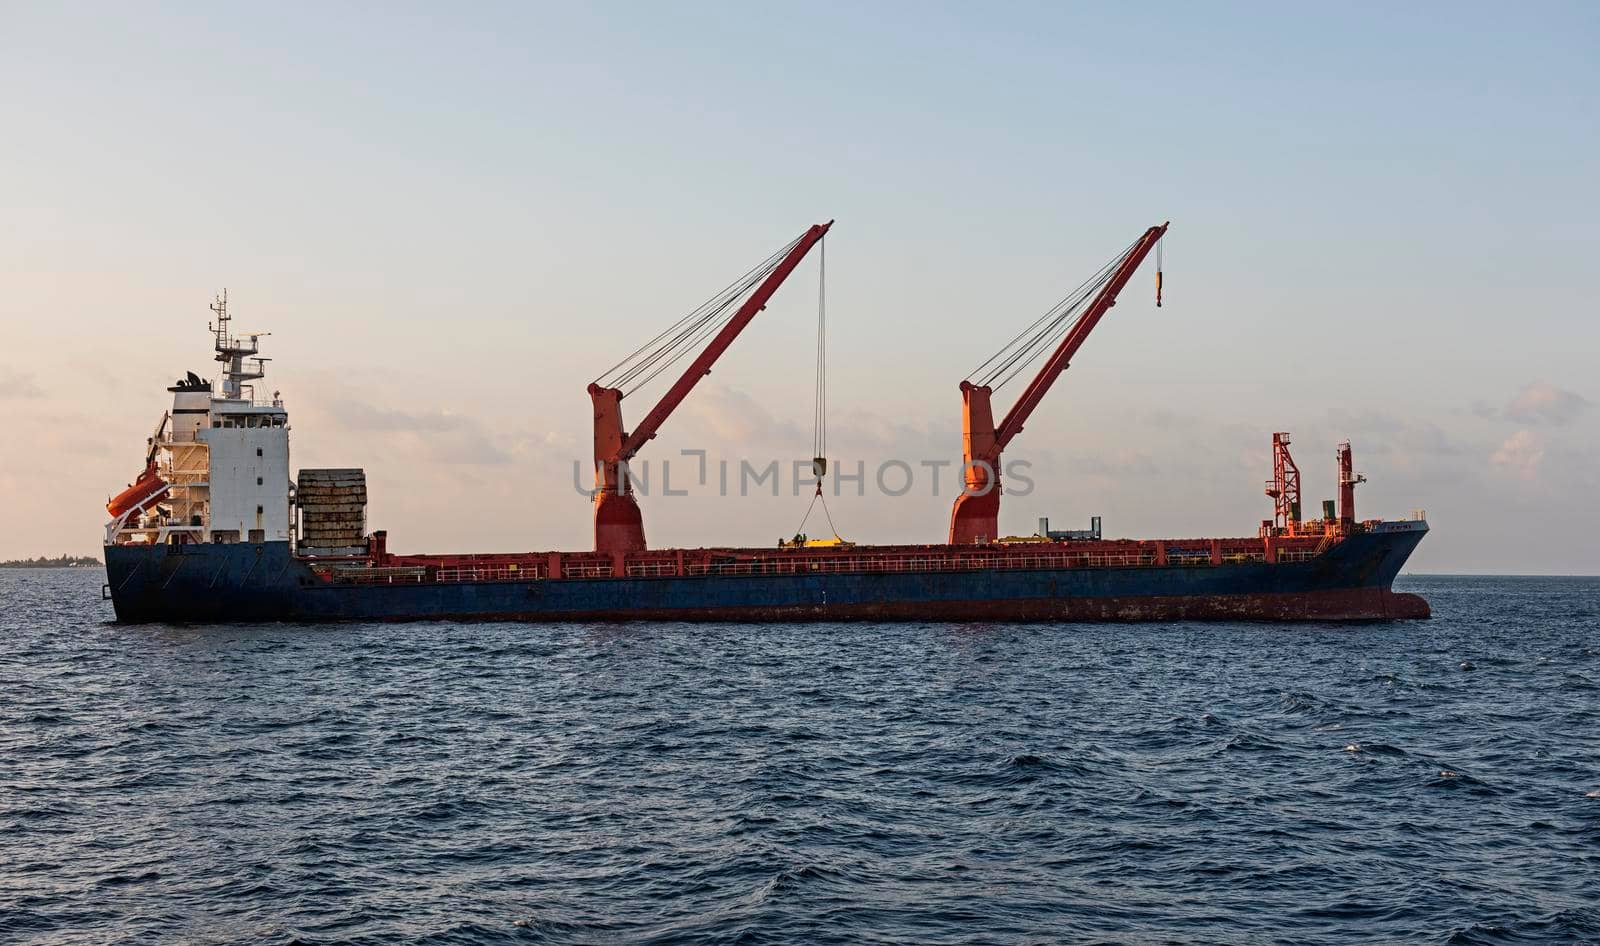 Large cargo container ship at anchor on sea with jib cranes and superstructure